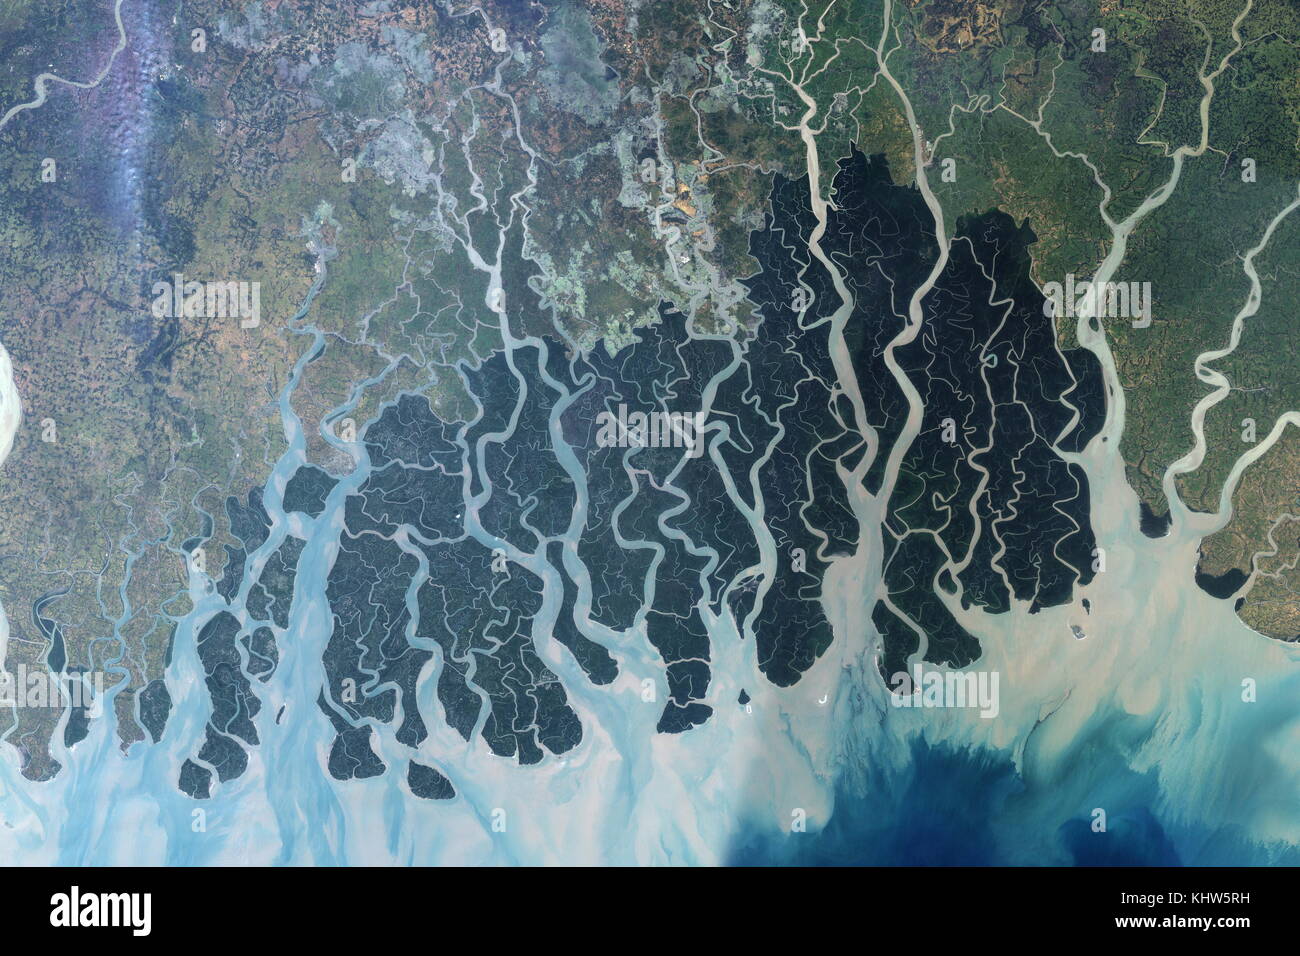 Aerial photograph taken of the Sundarbans. The Sundarbans is a vast forest in the coastal region of the Bay of Bengal, one of the natural wonders of the world. Dated 20th Century Stock Photo